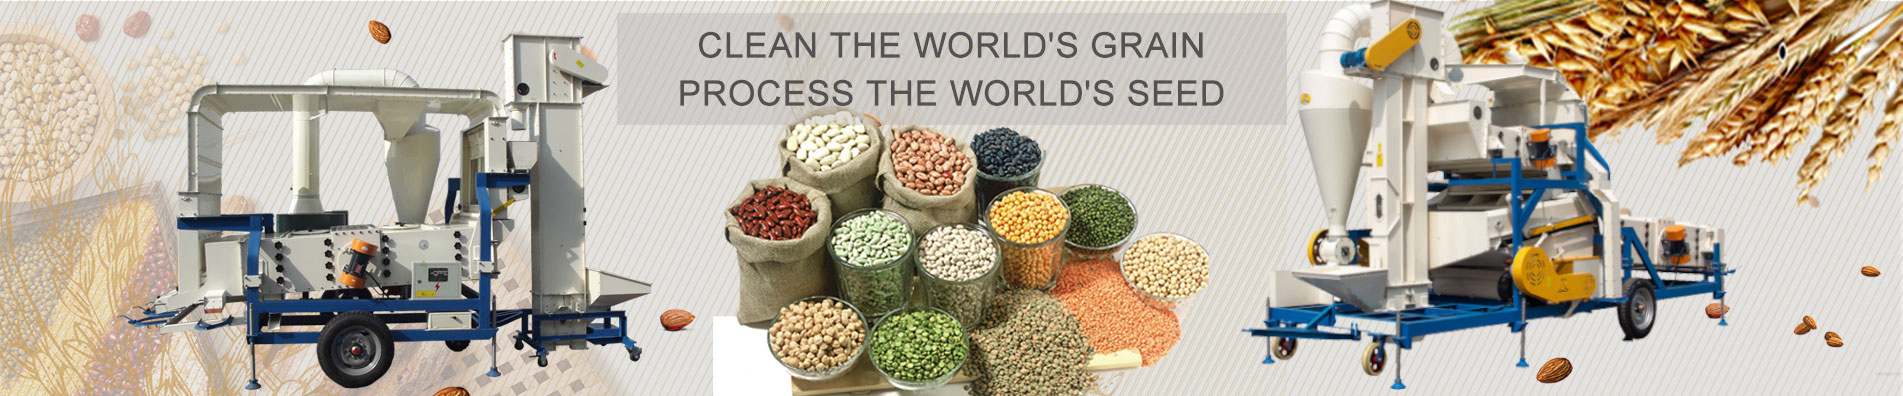 Clean the worlds grain  Process the worlds seed